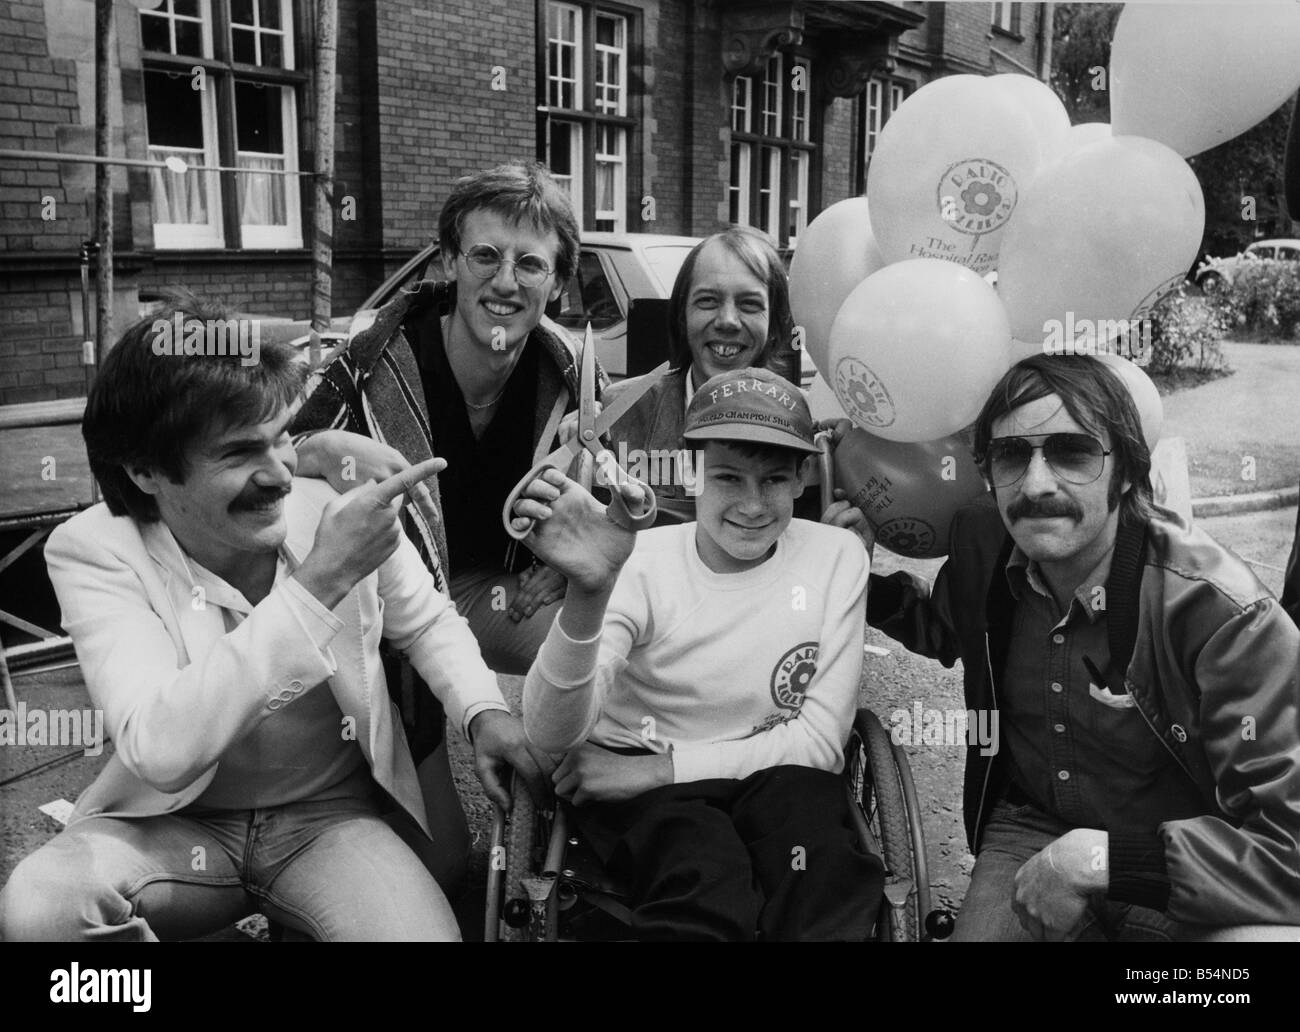 Disabled youngster Steven Graham officially launching Radio Lollipop at the Fleiming Memorial Hospital for Sick Children in Jesmond Newcastle Members of the Tyneside band Lindisfarne watched the opening l to r Ray Jackson Ray Laidlaw Rod Clements and Alan Hull 23 08 82 Stock Photo